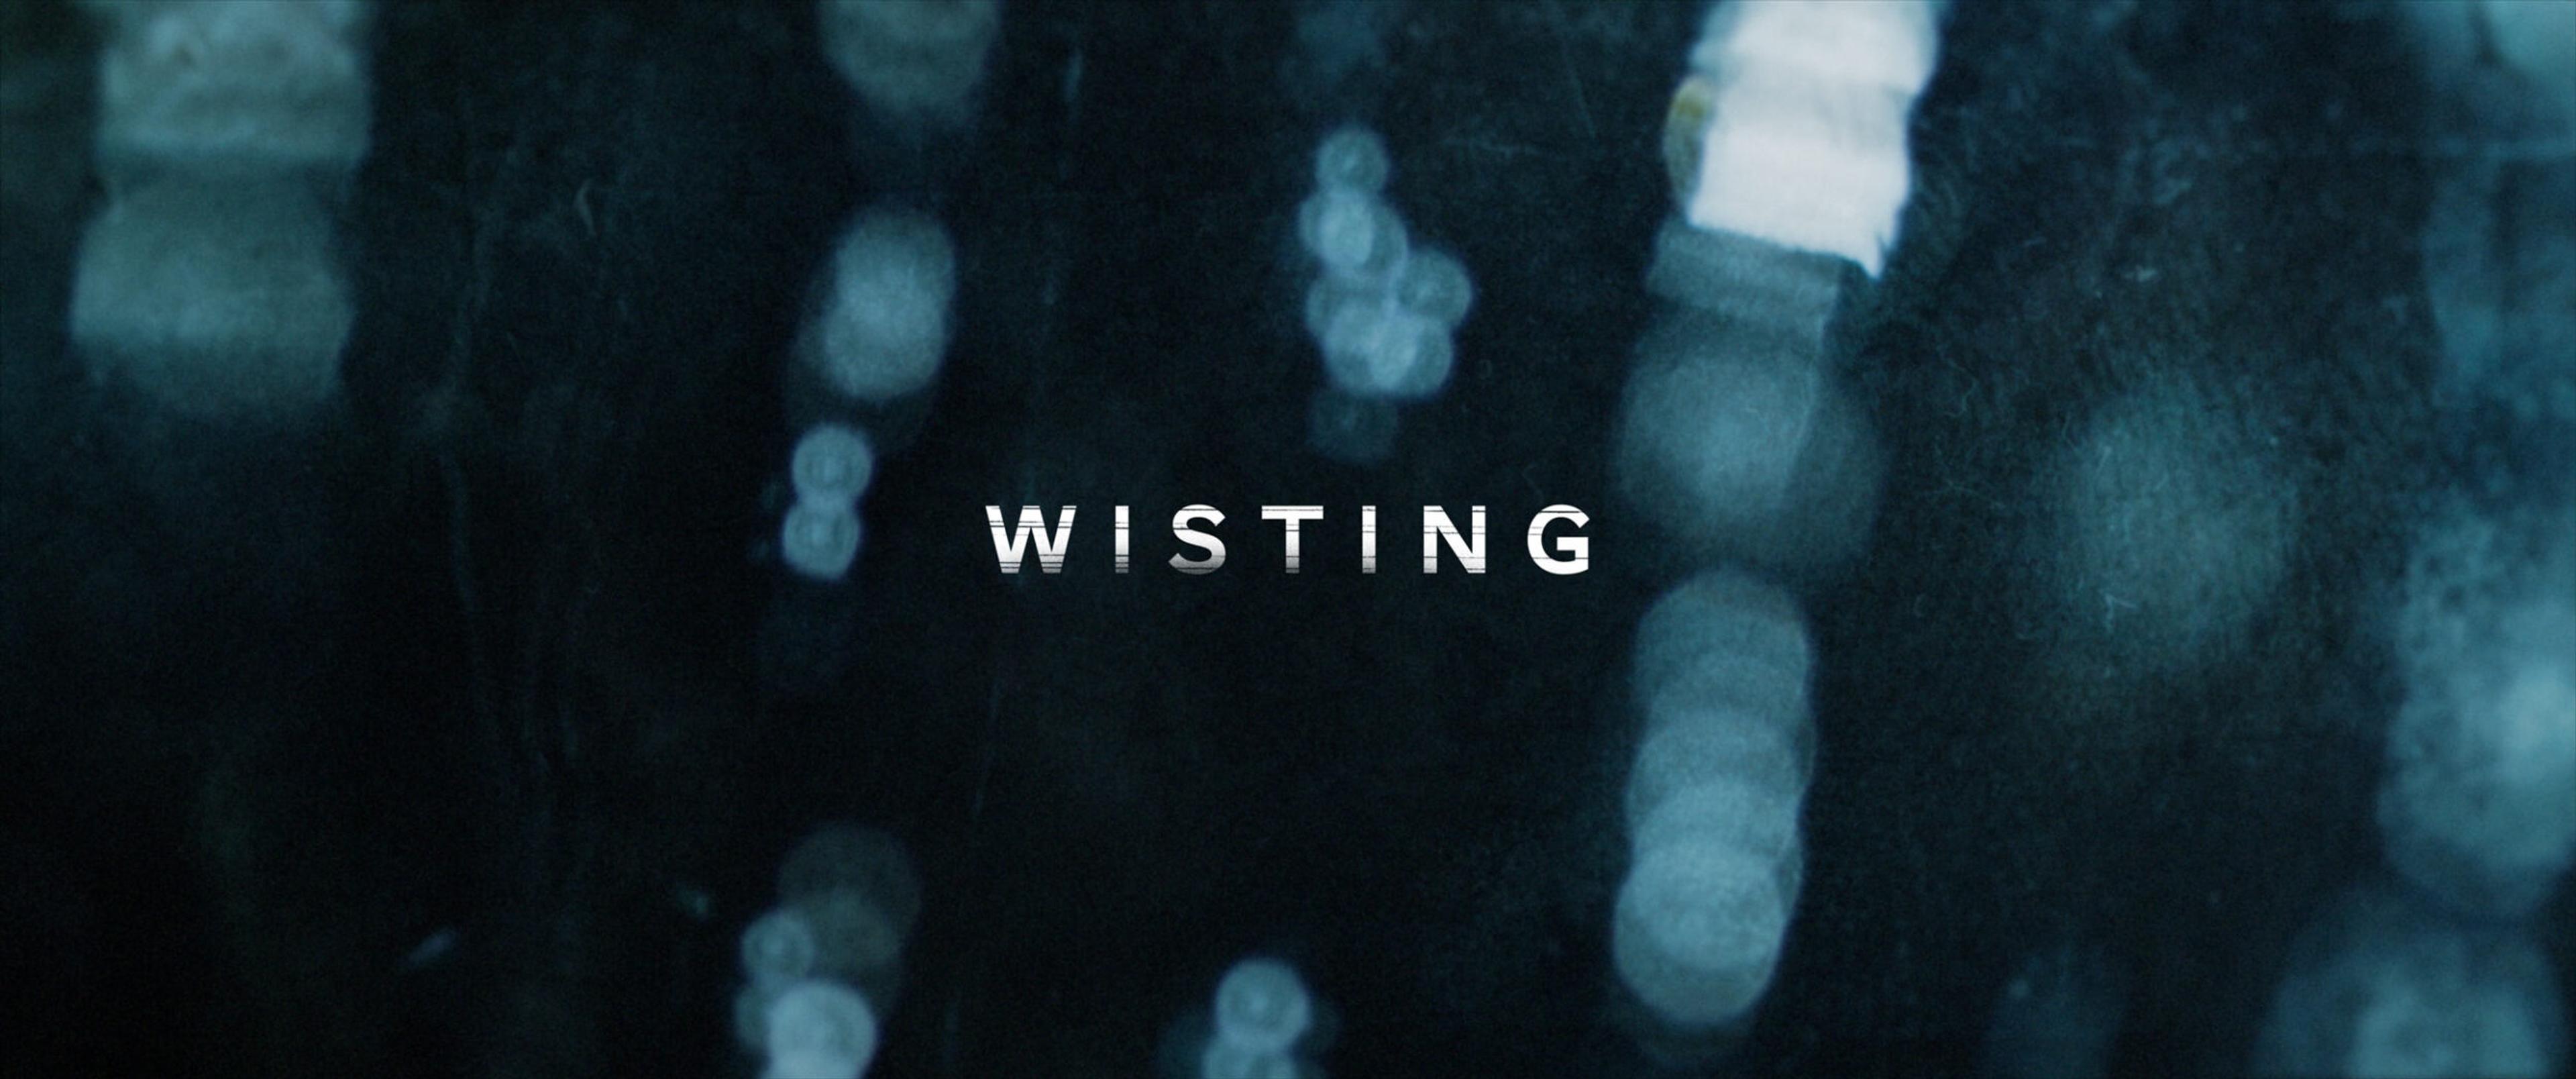 wisting tv series title logo on a blurry rainy background